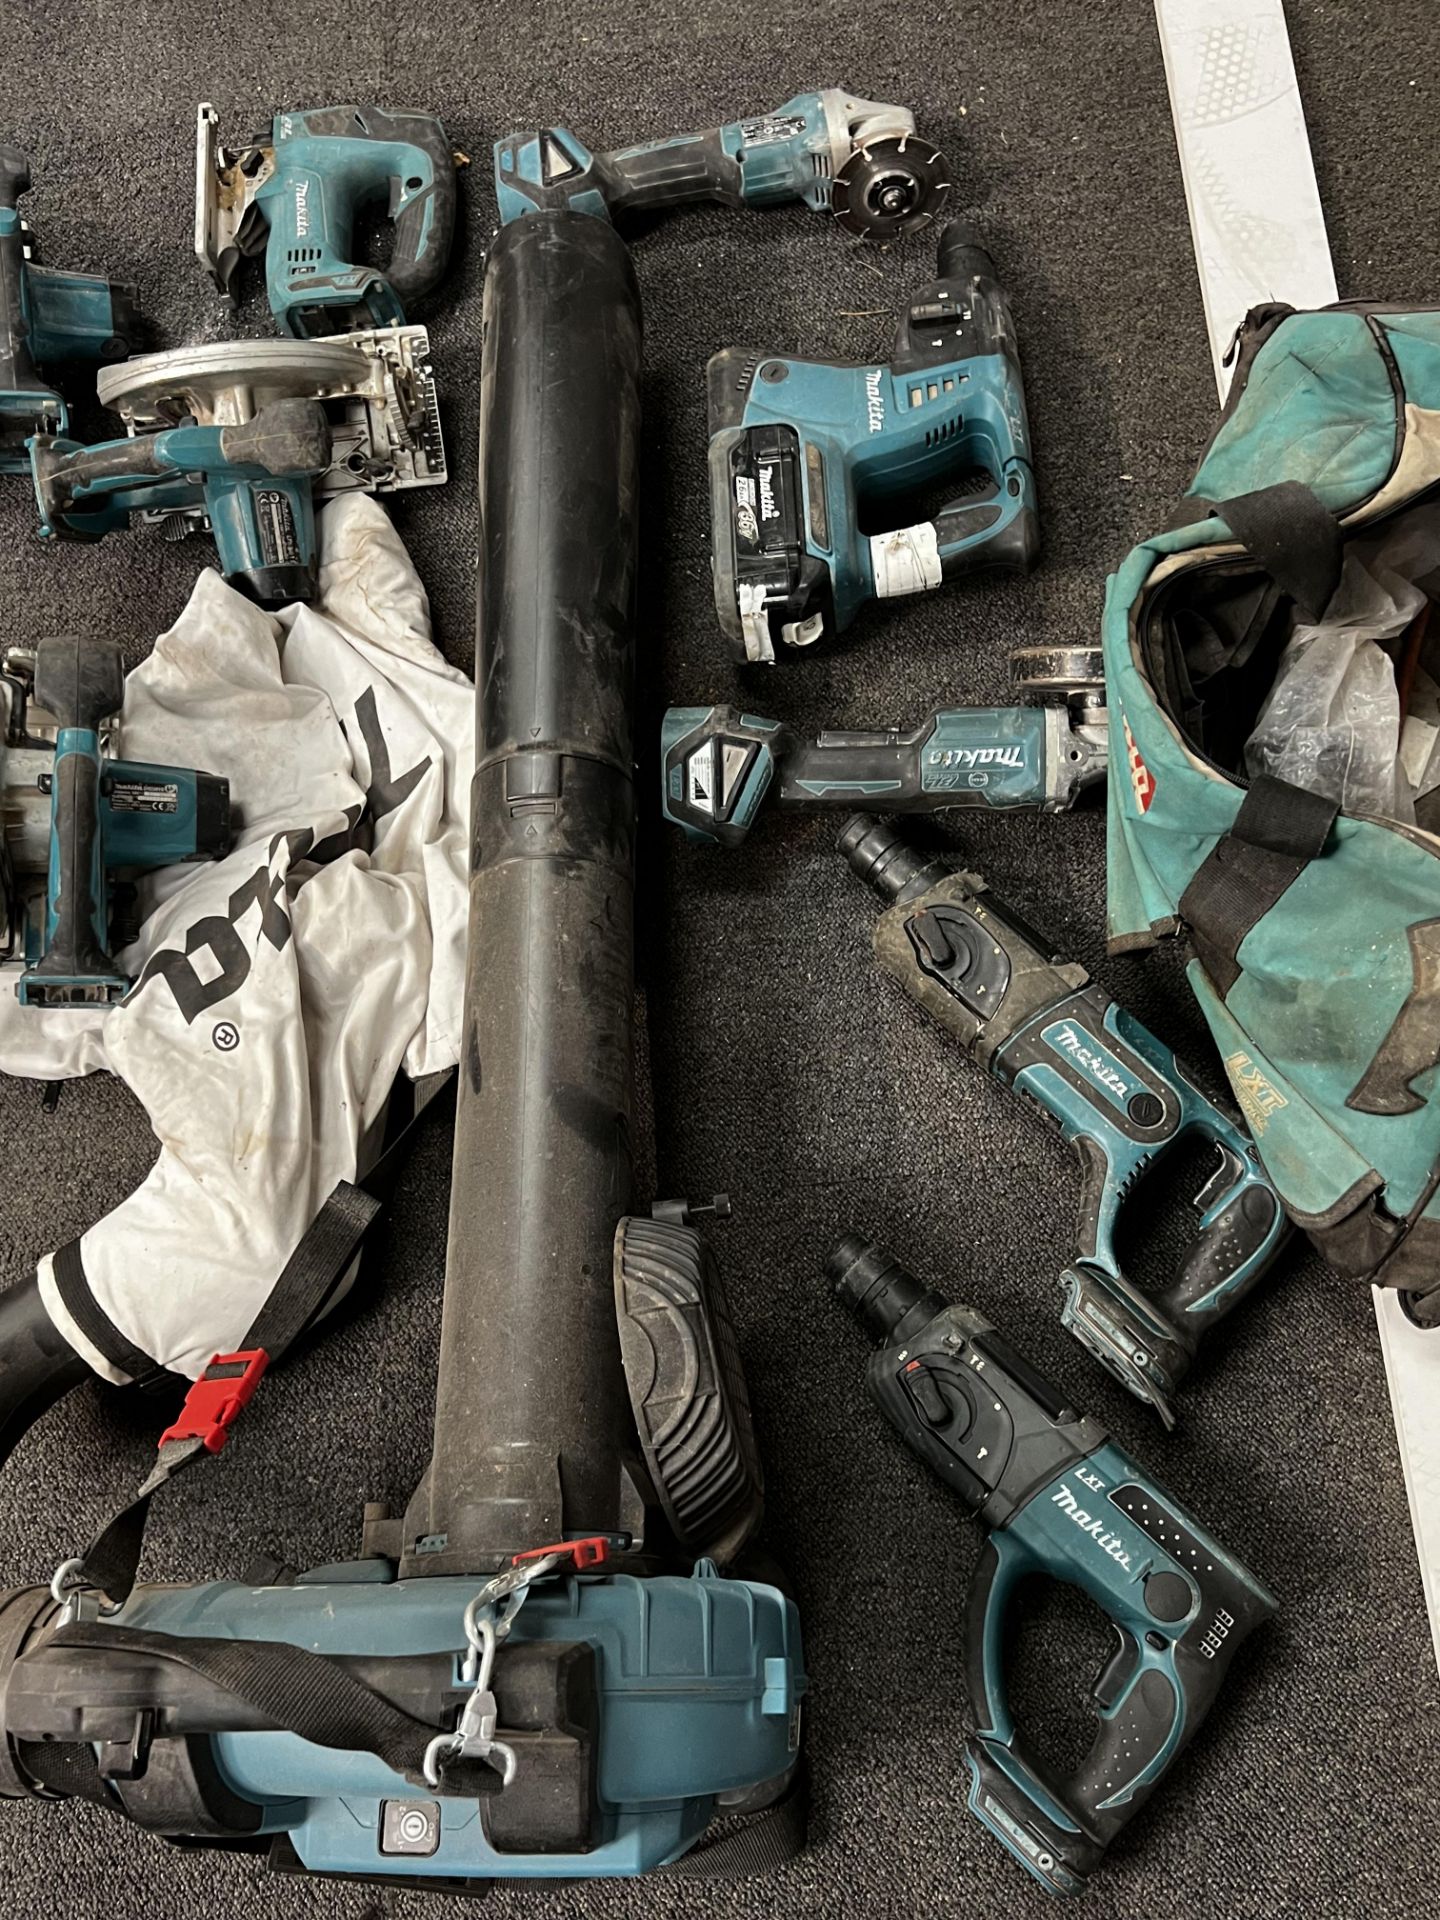 Makita rechargeable power tools as shown in photos - Image 4 of 5